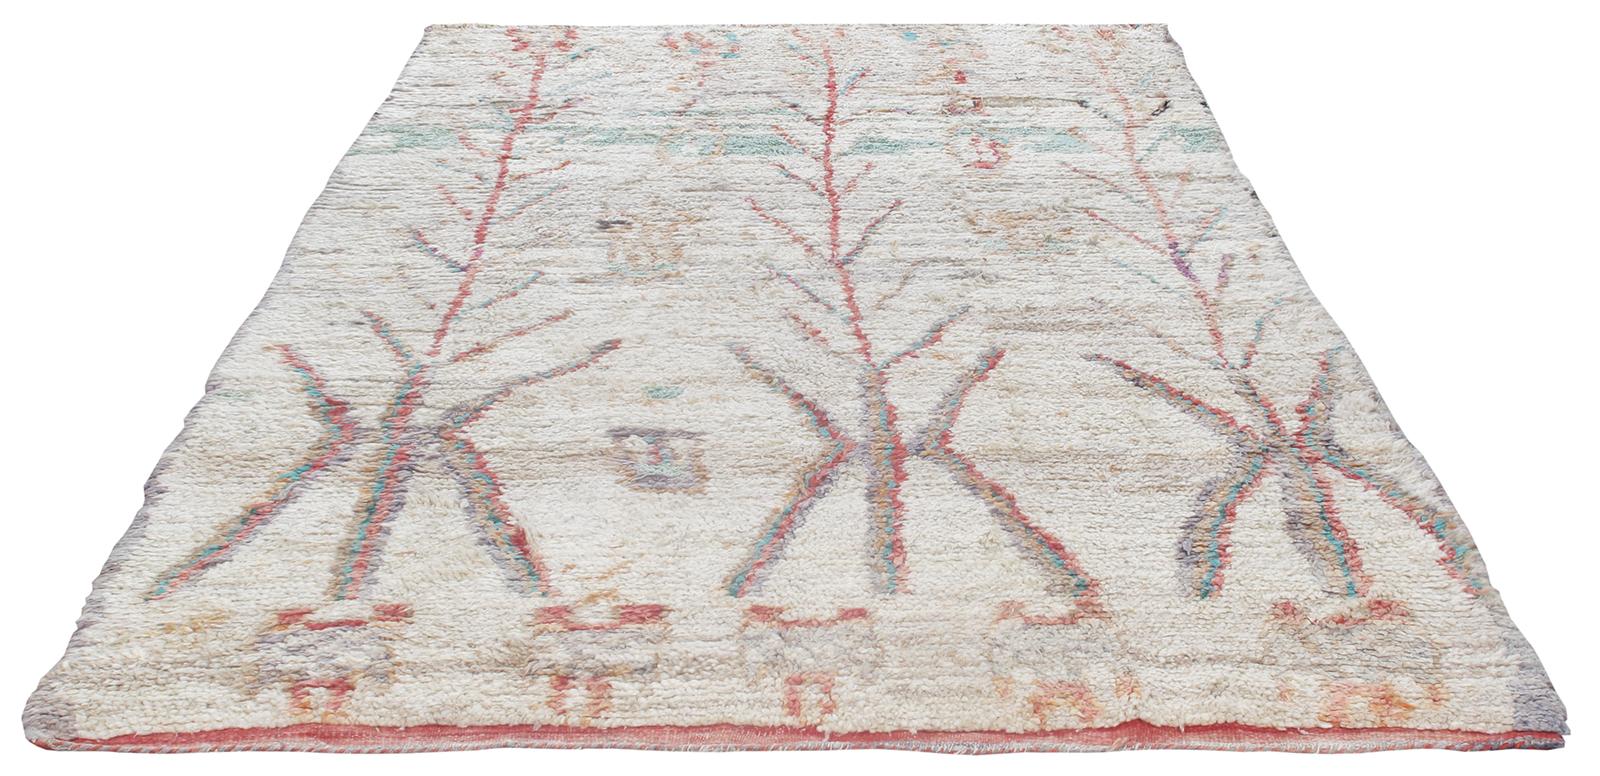 Our vintage Moroccan rugs are part of a skillfully curated collection of rare and unusual designs. They are made of all-natural dyes and 100% handspun wool from the Atlas Mountain region in North Africa. These rugs are all one of kind as they were